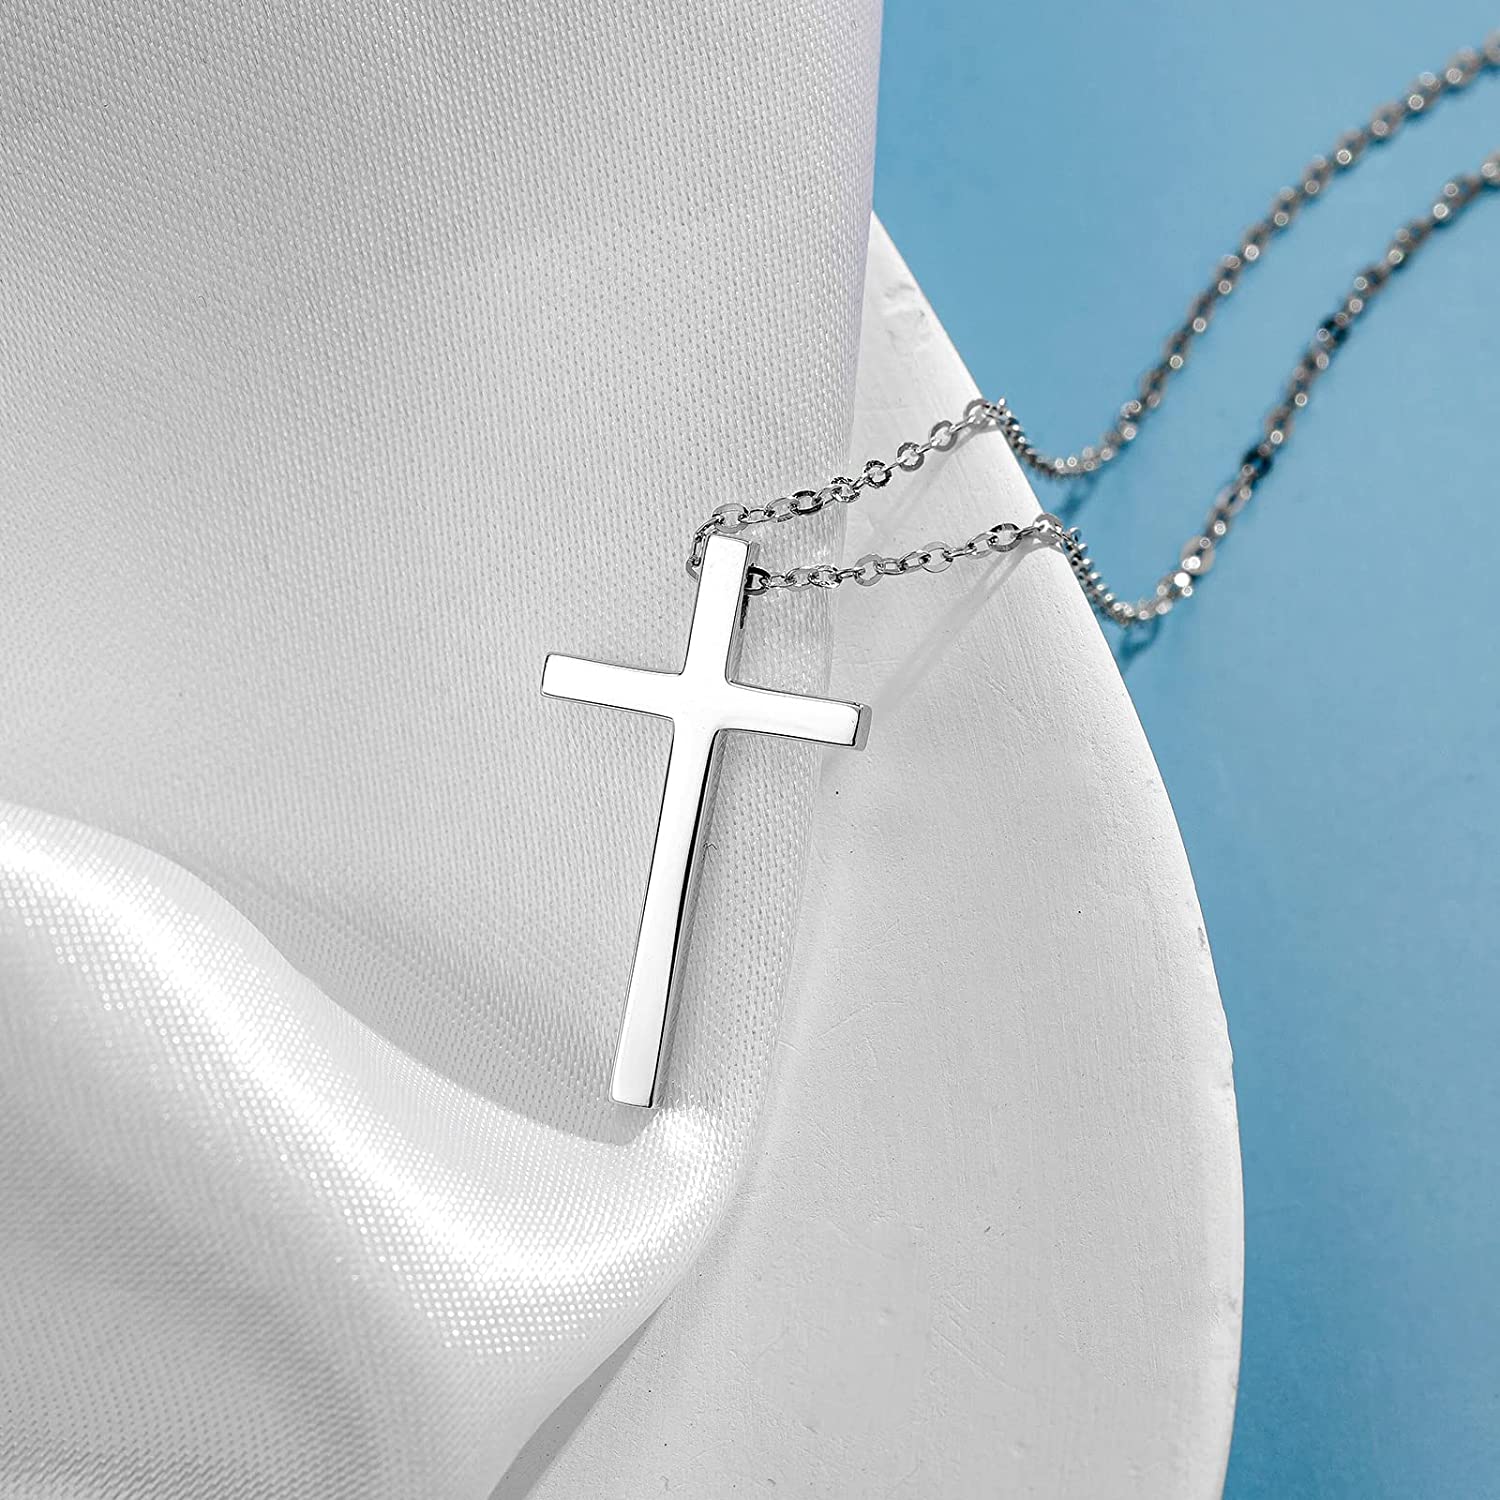 Fanci "Committed Faith" Cross Pendant 14K White Gold Necklace Back